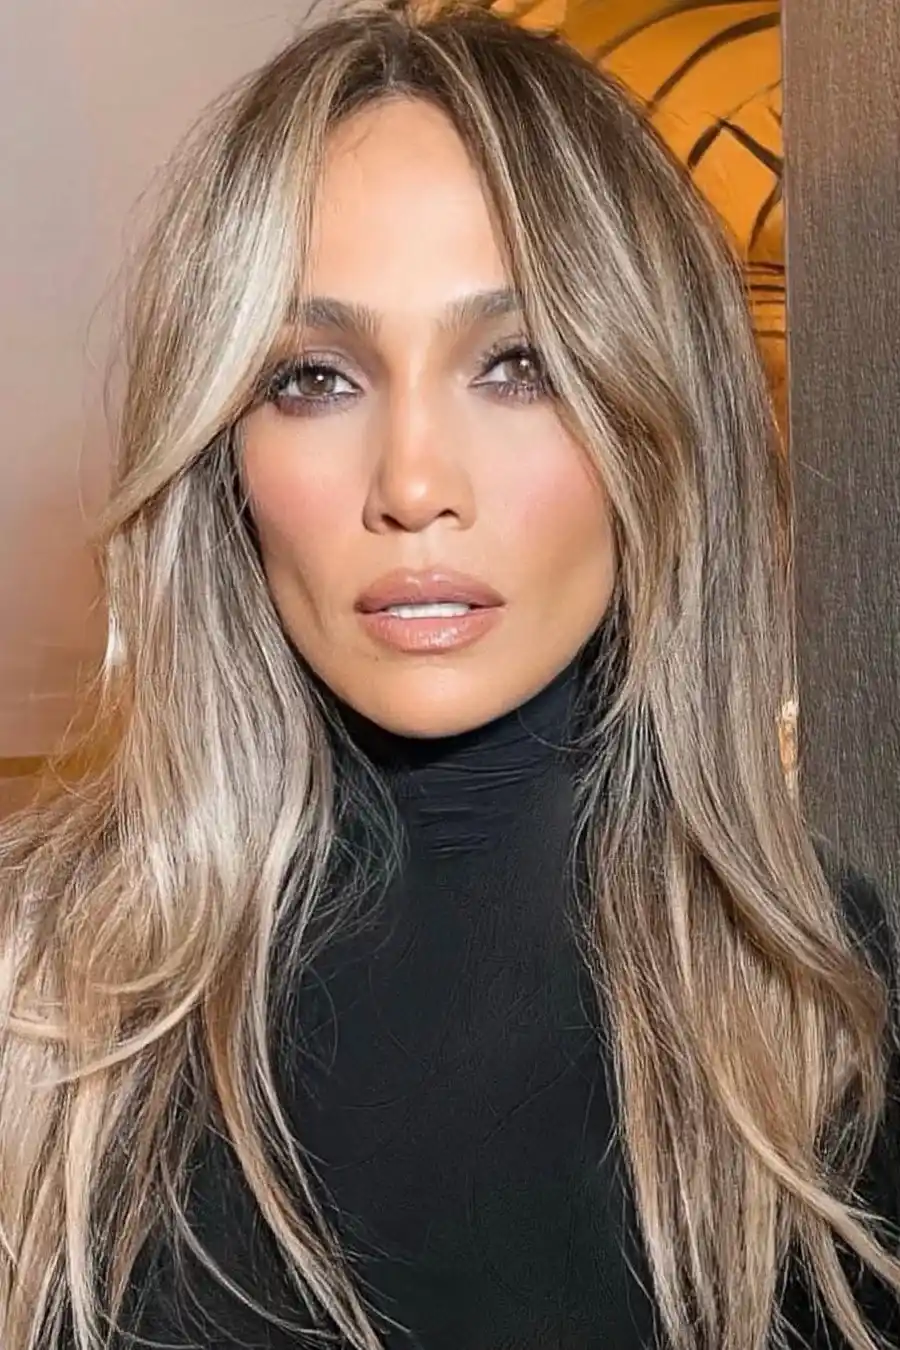 Jennifer Lopez's new chunky blonde highlights are keeping the summertime trend alive.